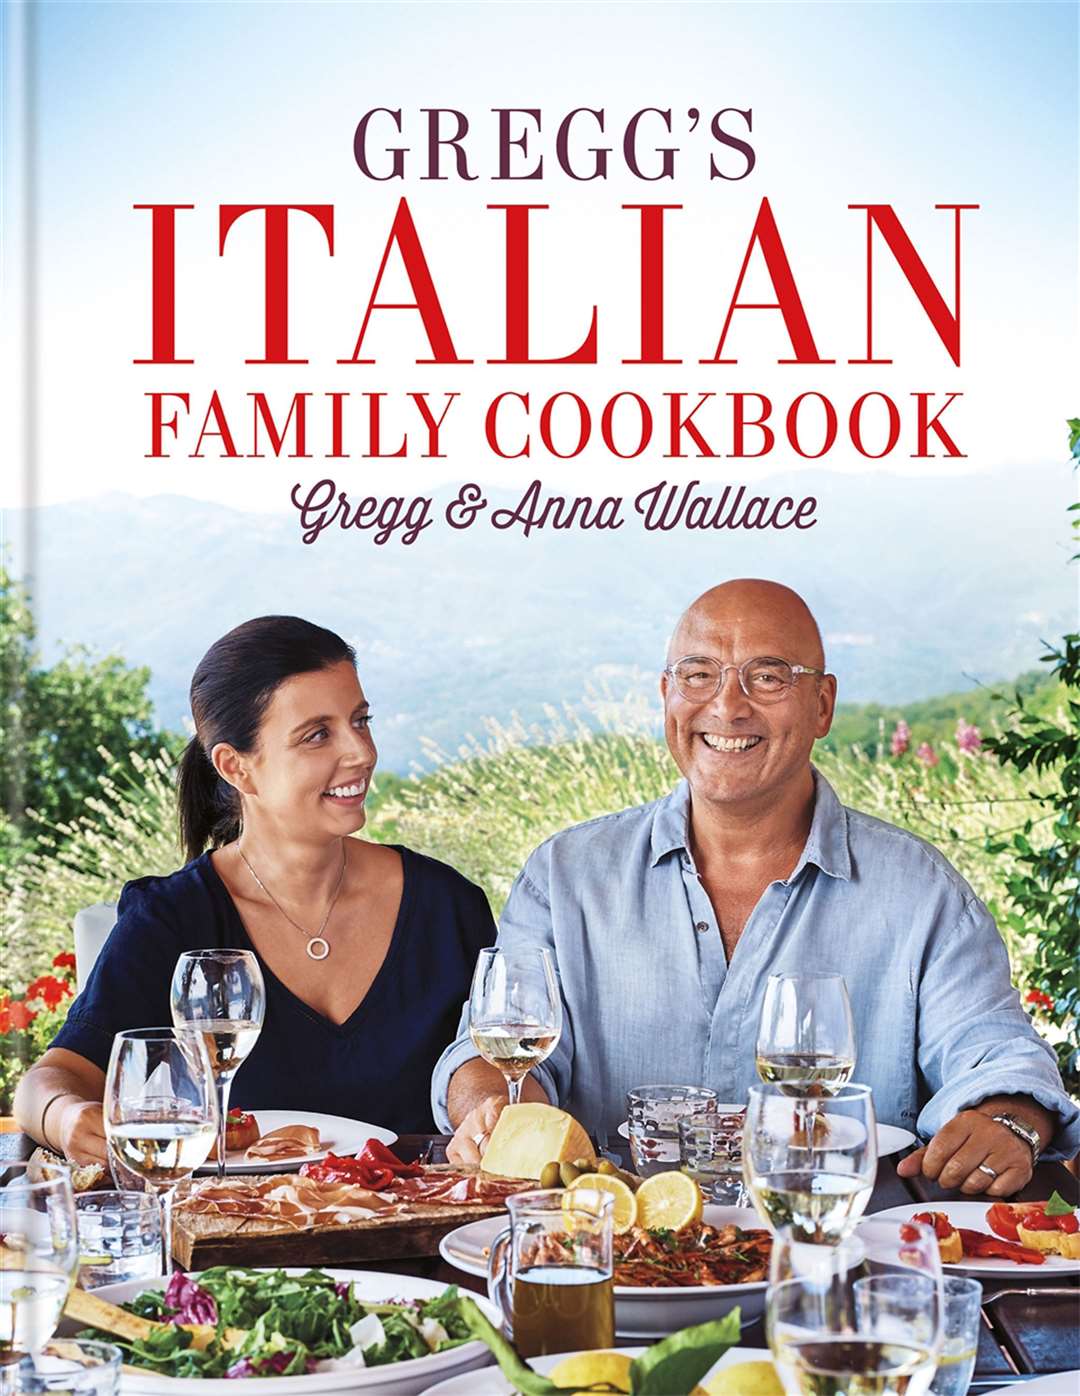 Gregg’s Italian Family Cookbook by Gregg & Anna Wallace is published by Mitchell Beazley, priced £20. Available now (octopusbooks.co.uk).